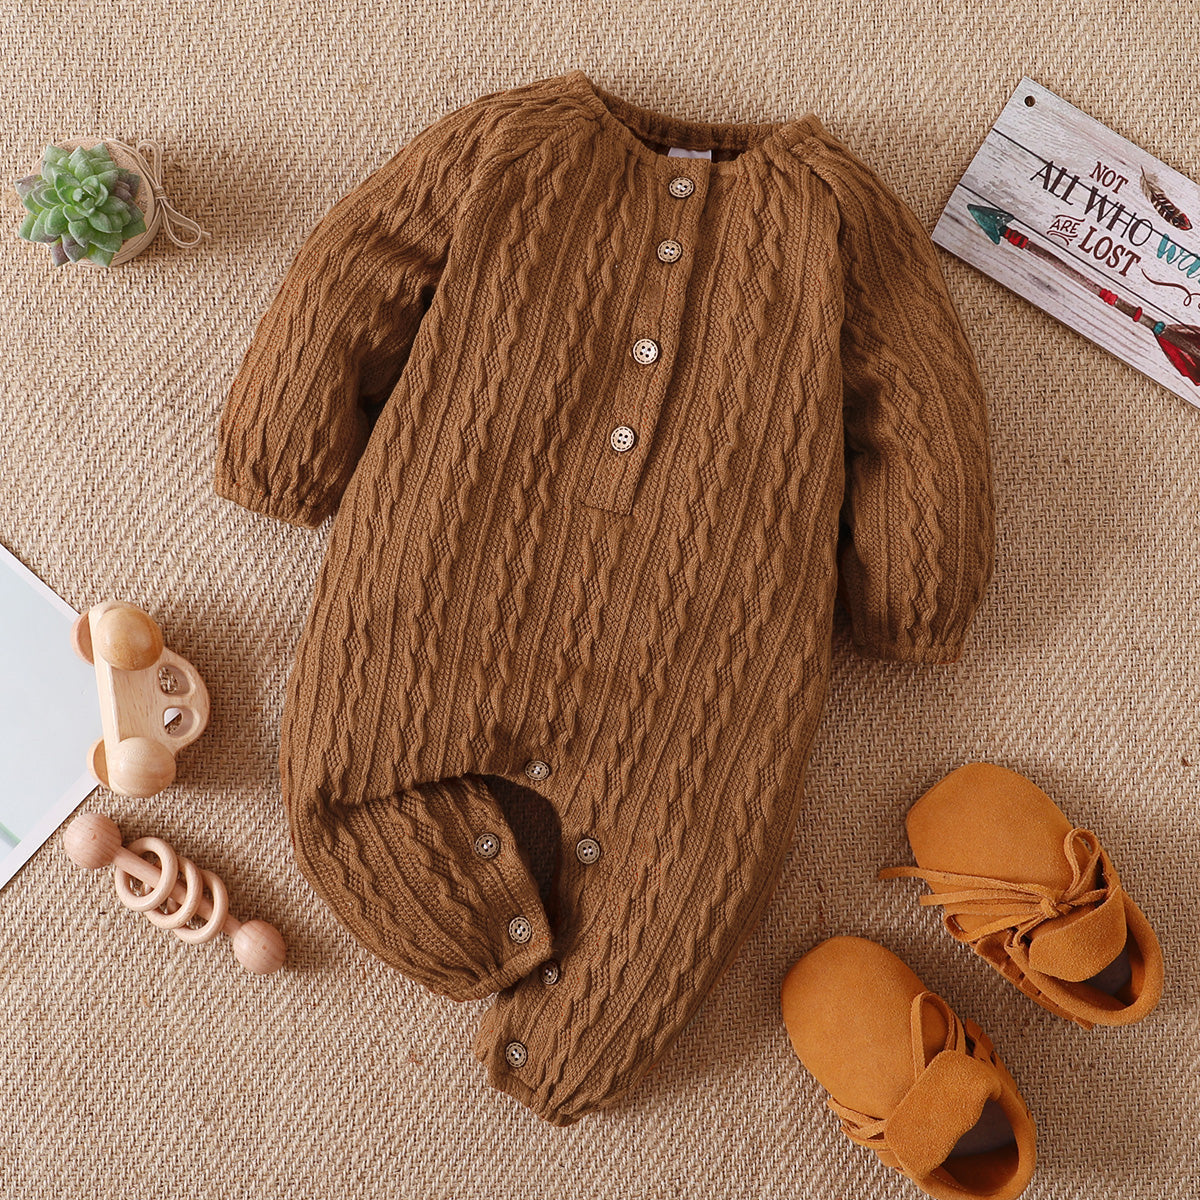 Solid Knitted Button Design Long-sleeve Baby Jumpsuit